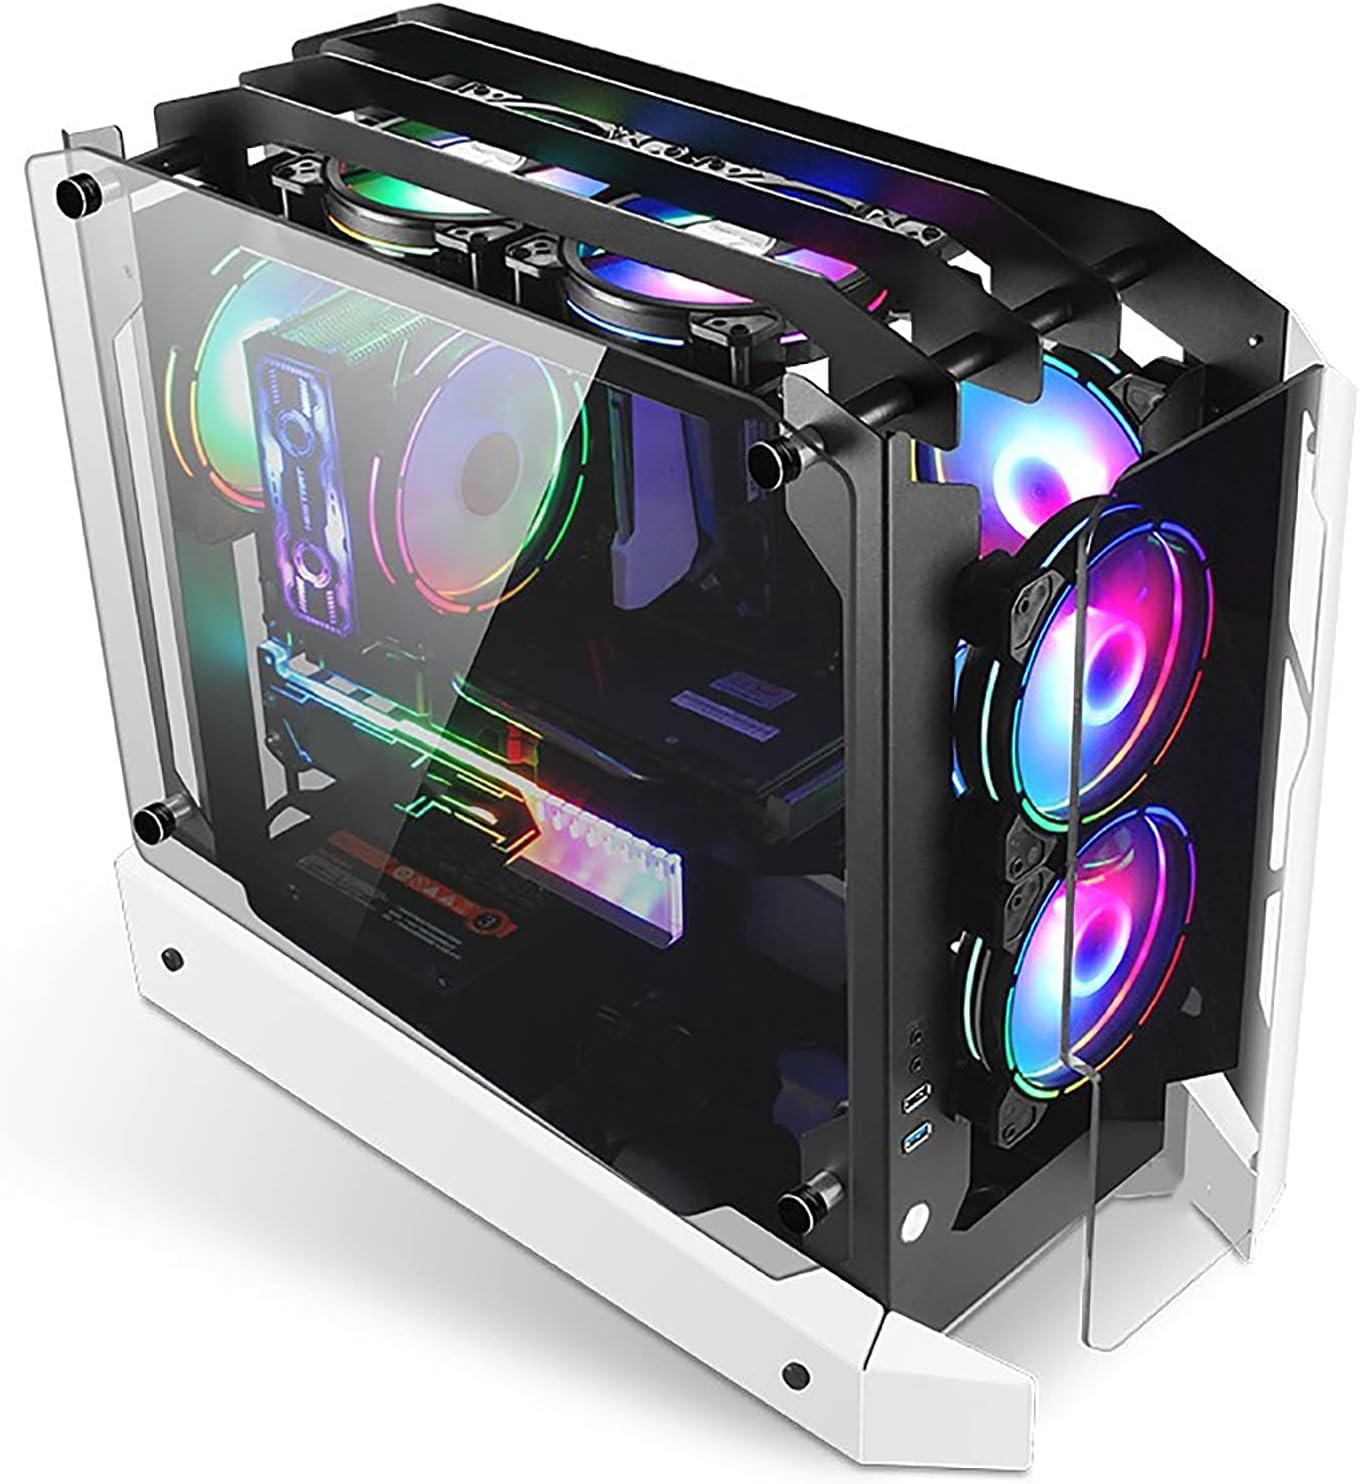 A modern gaming pc with rgb lighting and a transparent side panel comes Intel Core i7-12700K processer equipped with powerful perfomance, Nvidia GeForce RTX 4060 Graphic delivers top-notch performance for immersive gameplay,16GB 3600MHZ RGB Ram ensures smooth  multitasking, while the 1TB Nvme SSD provides ample storage space for your games